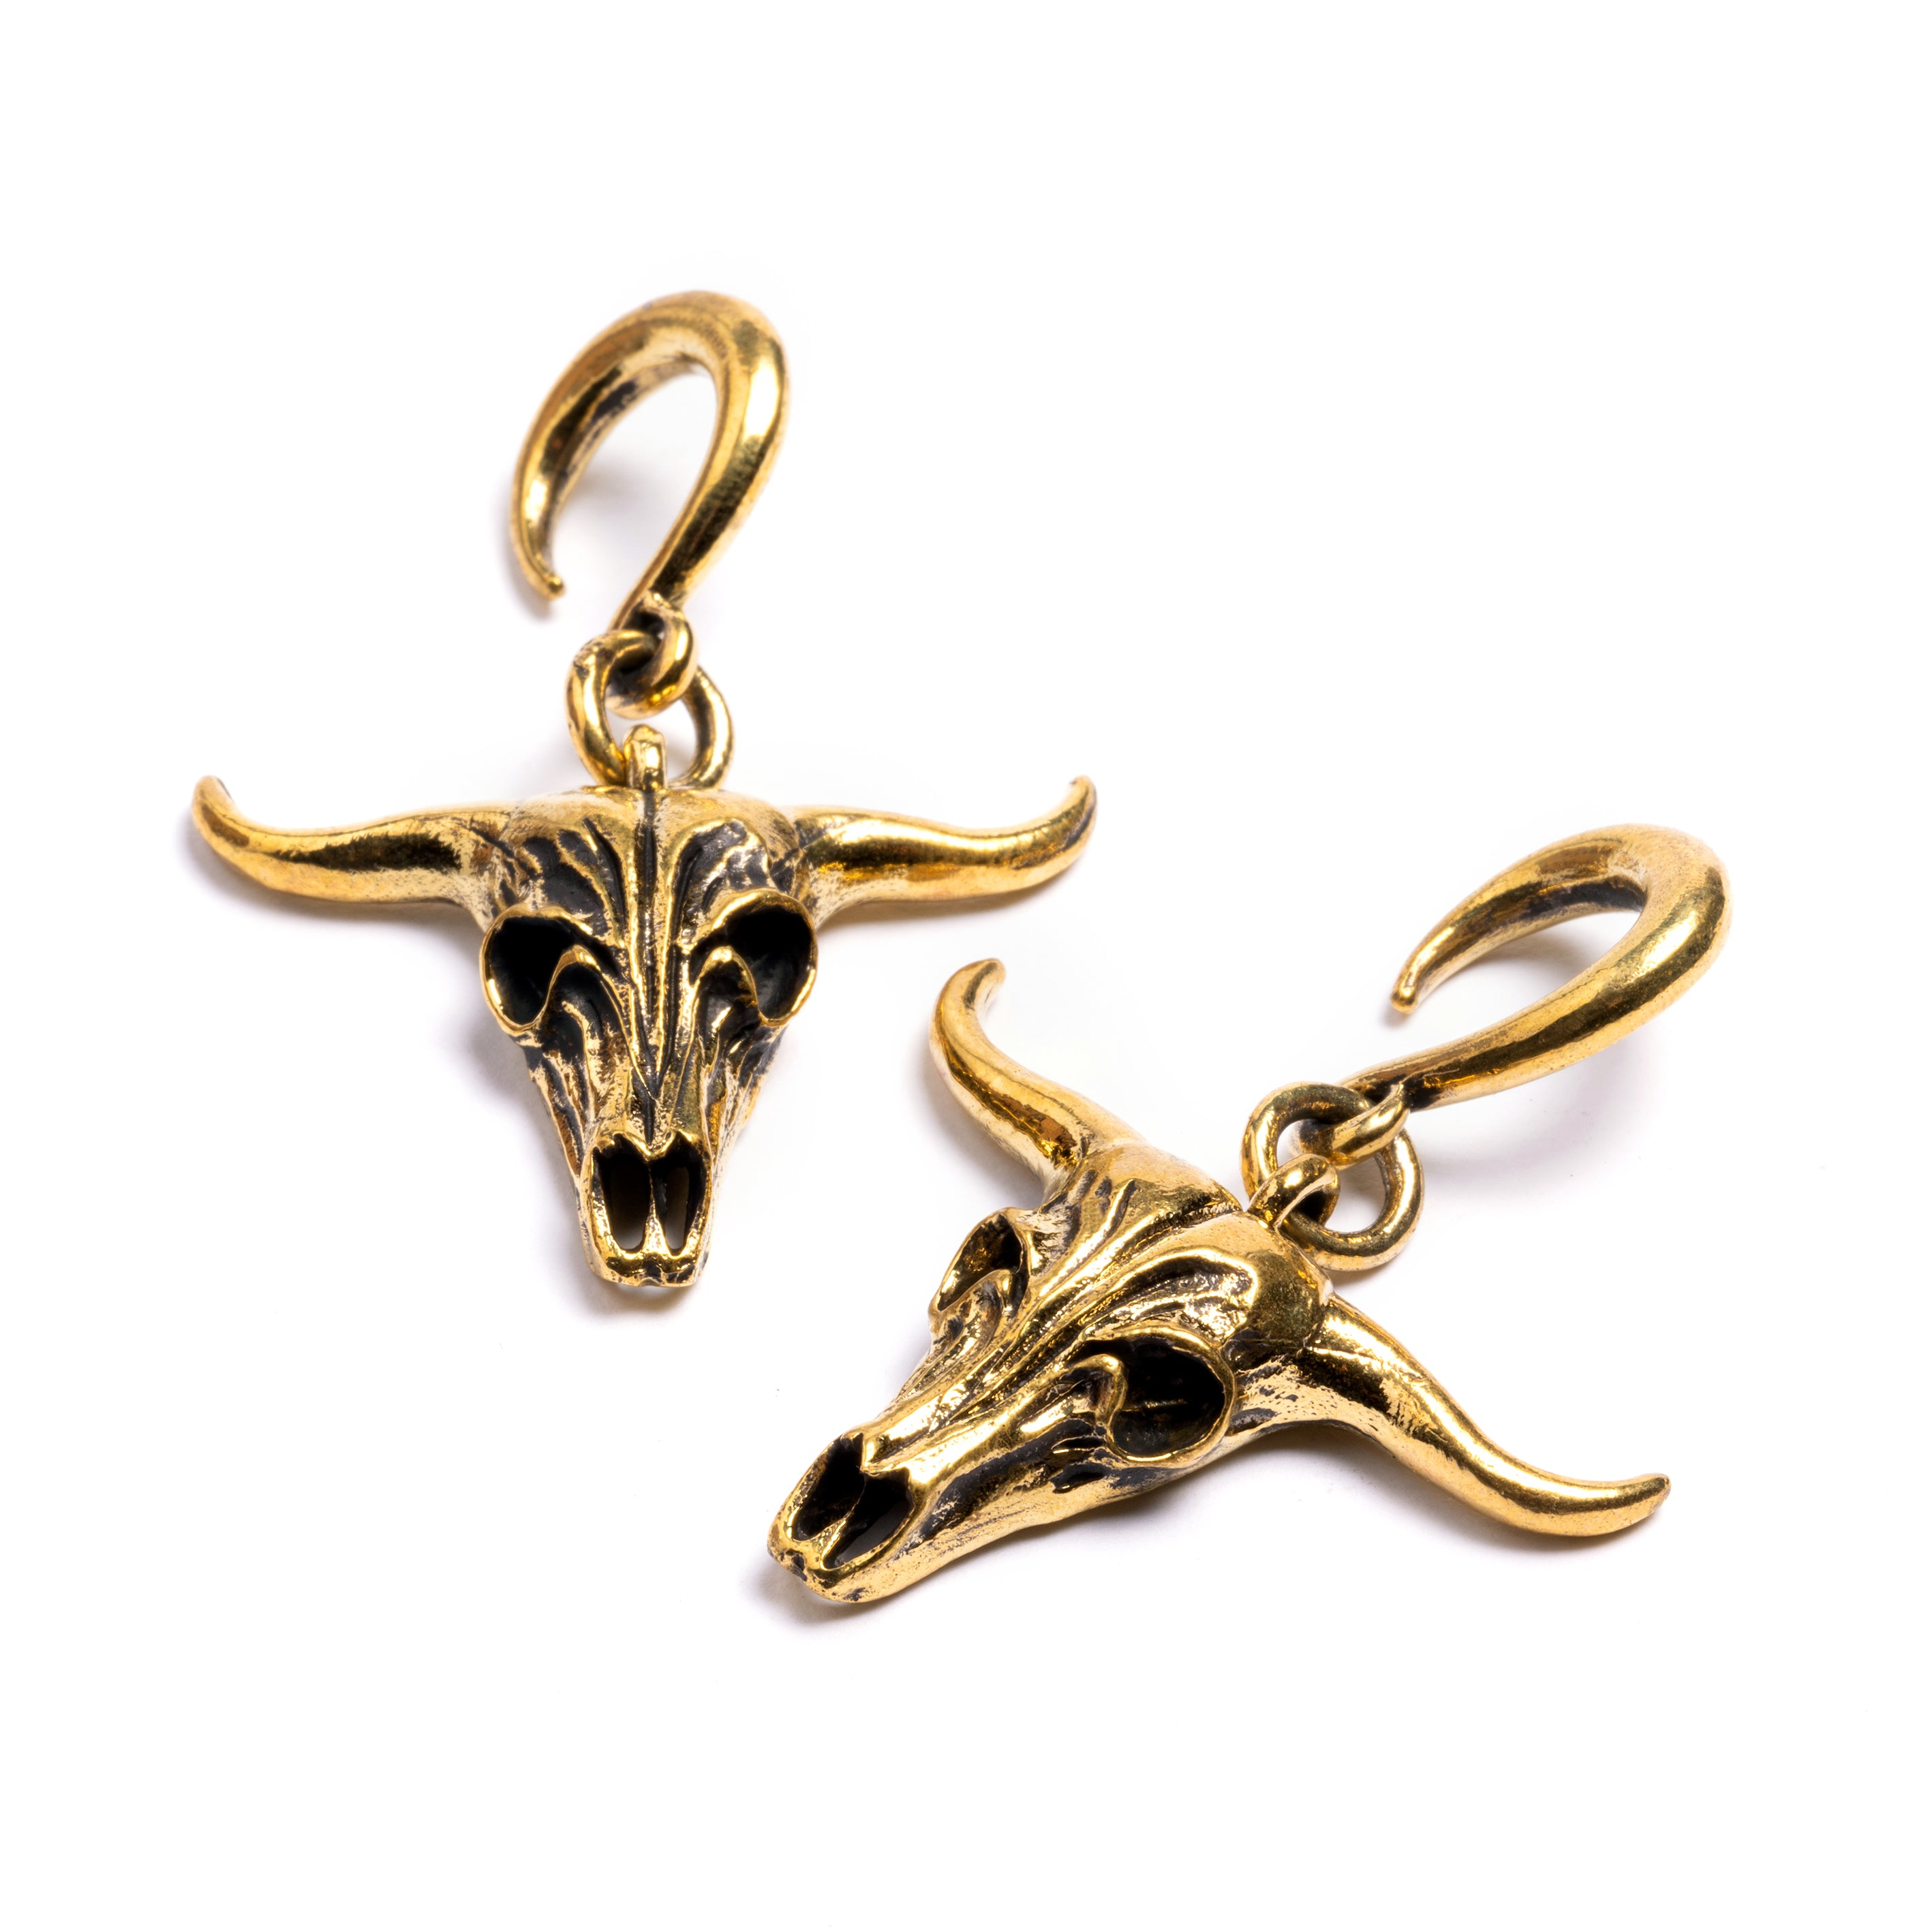 pair of gold brass longhorn skull ear weights hangers front and side view